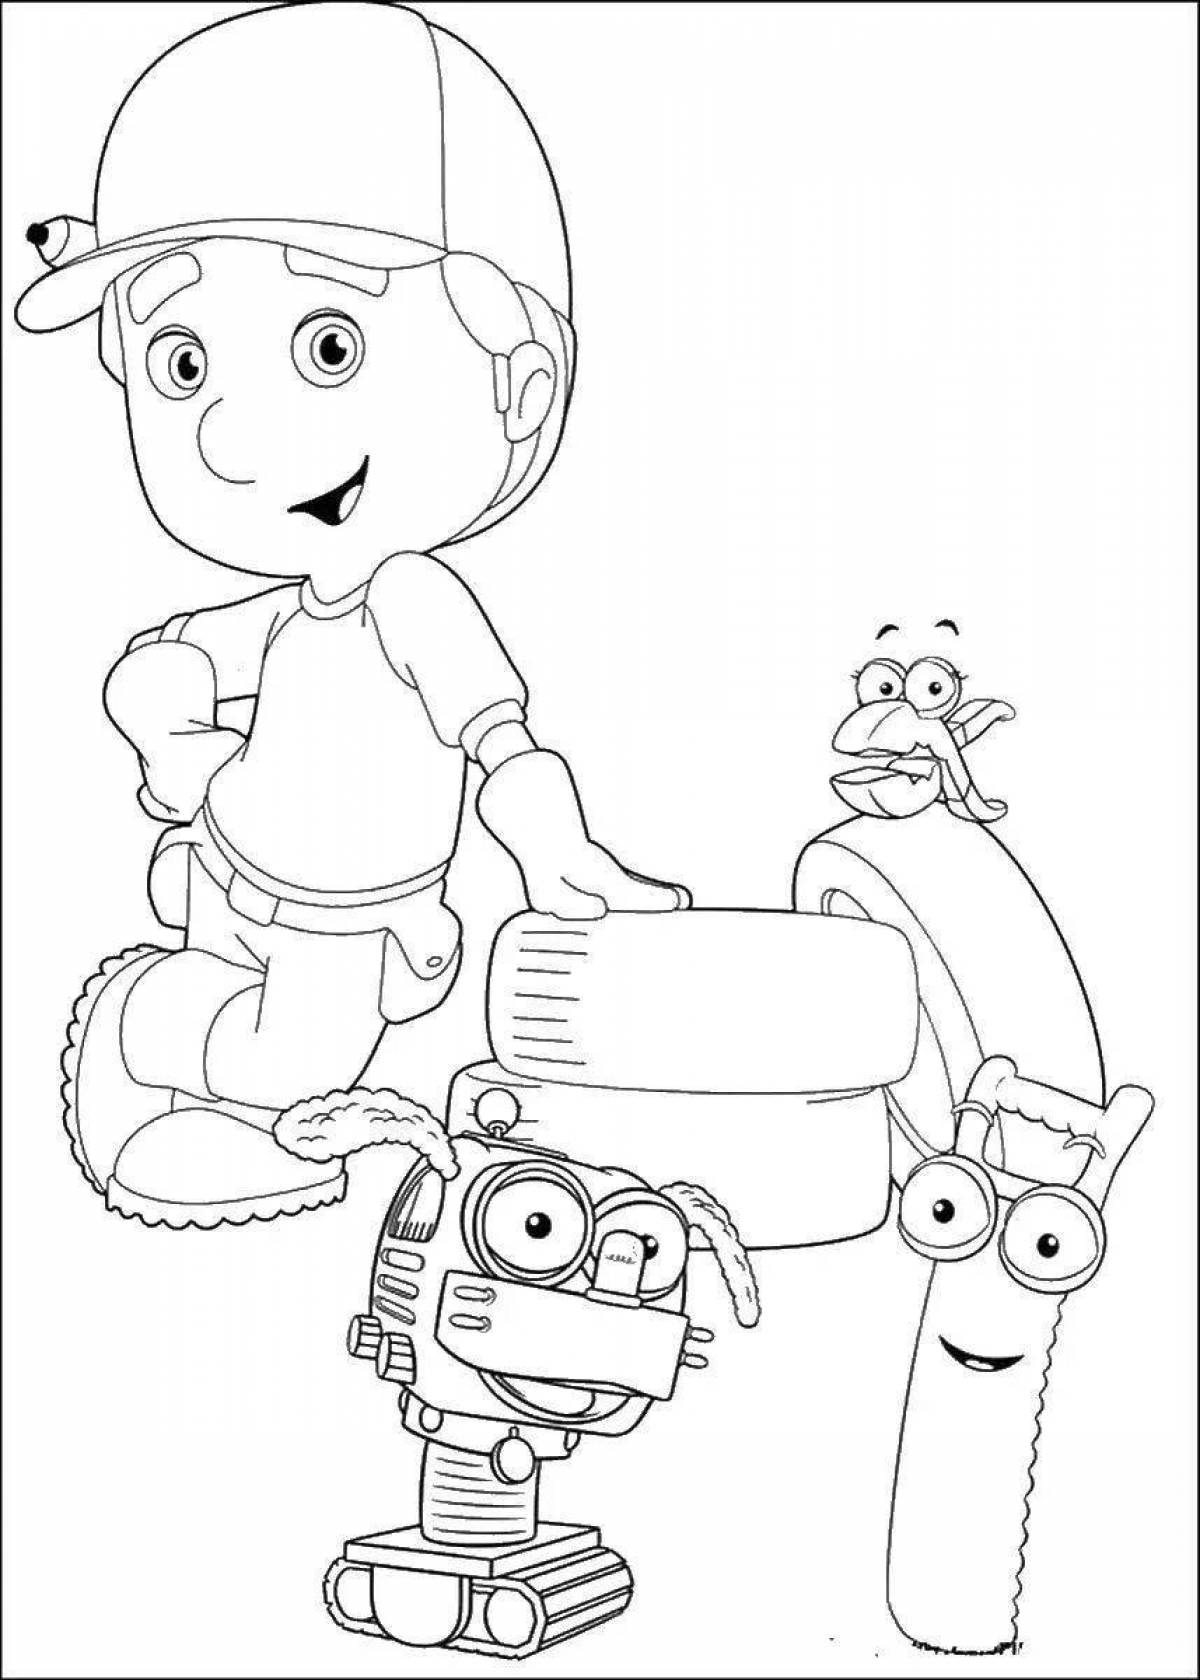 Charming gear coloring page